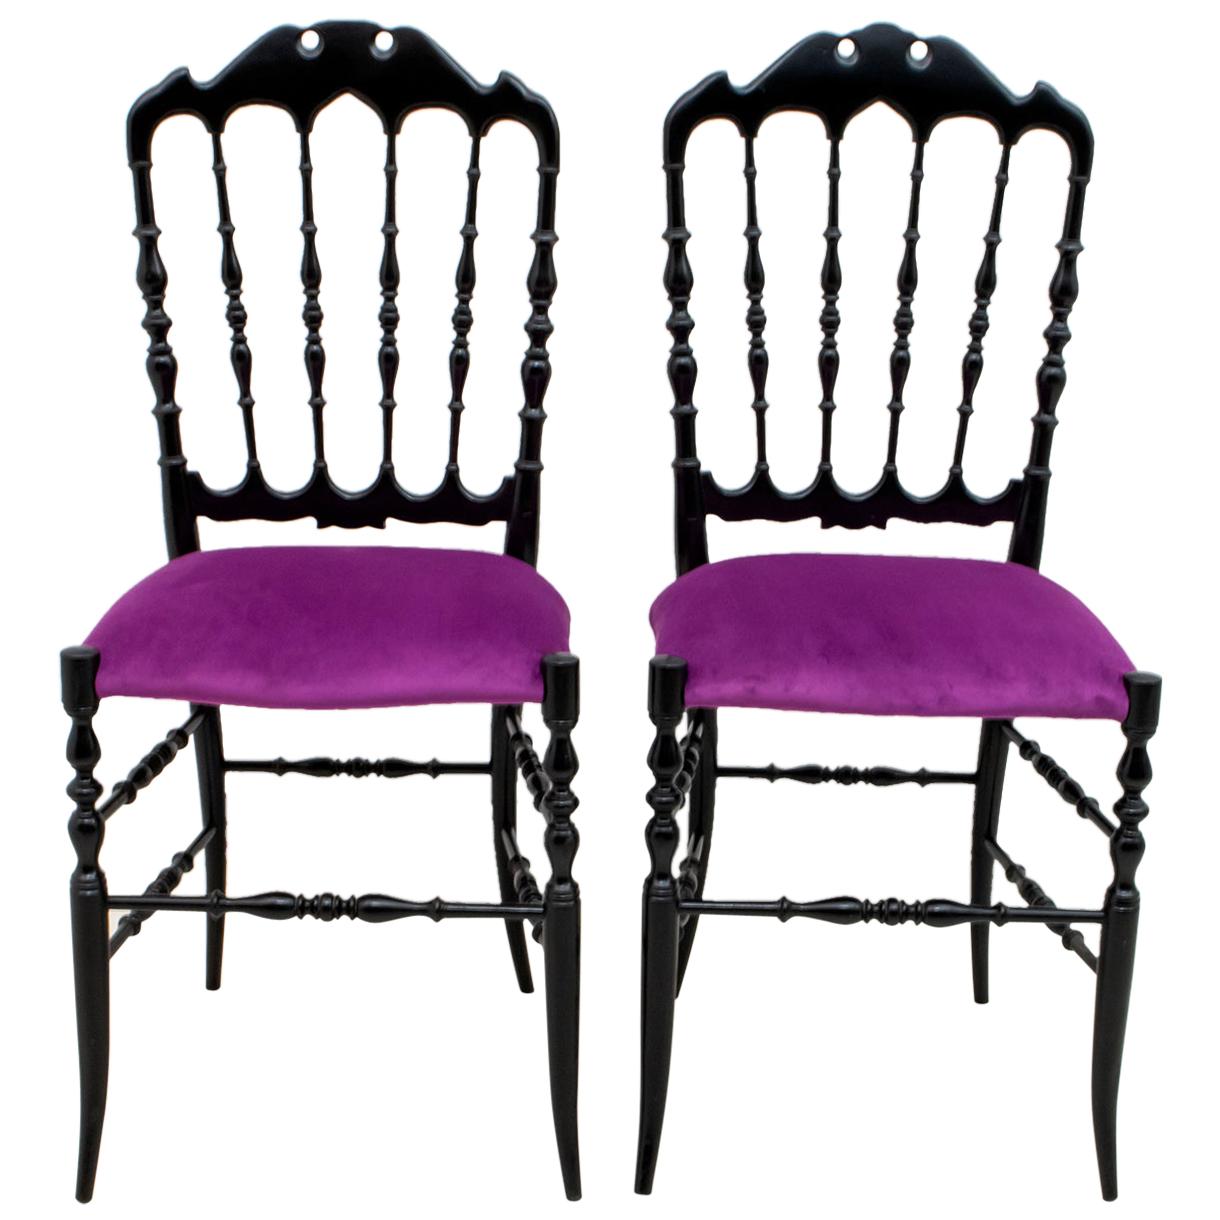 This pair of typical Chiavari chairs was designed by Gaetano Descalzi in the city of Chiavari in Italy, where they have since been produced in various models.
Made of black lacquered beech and upholstered in fuchsia velvet.
The chairs have been